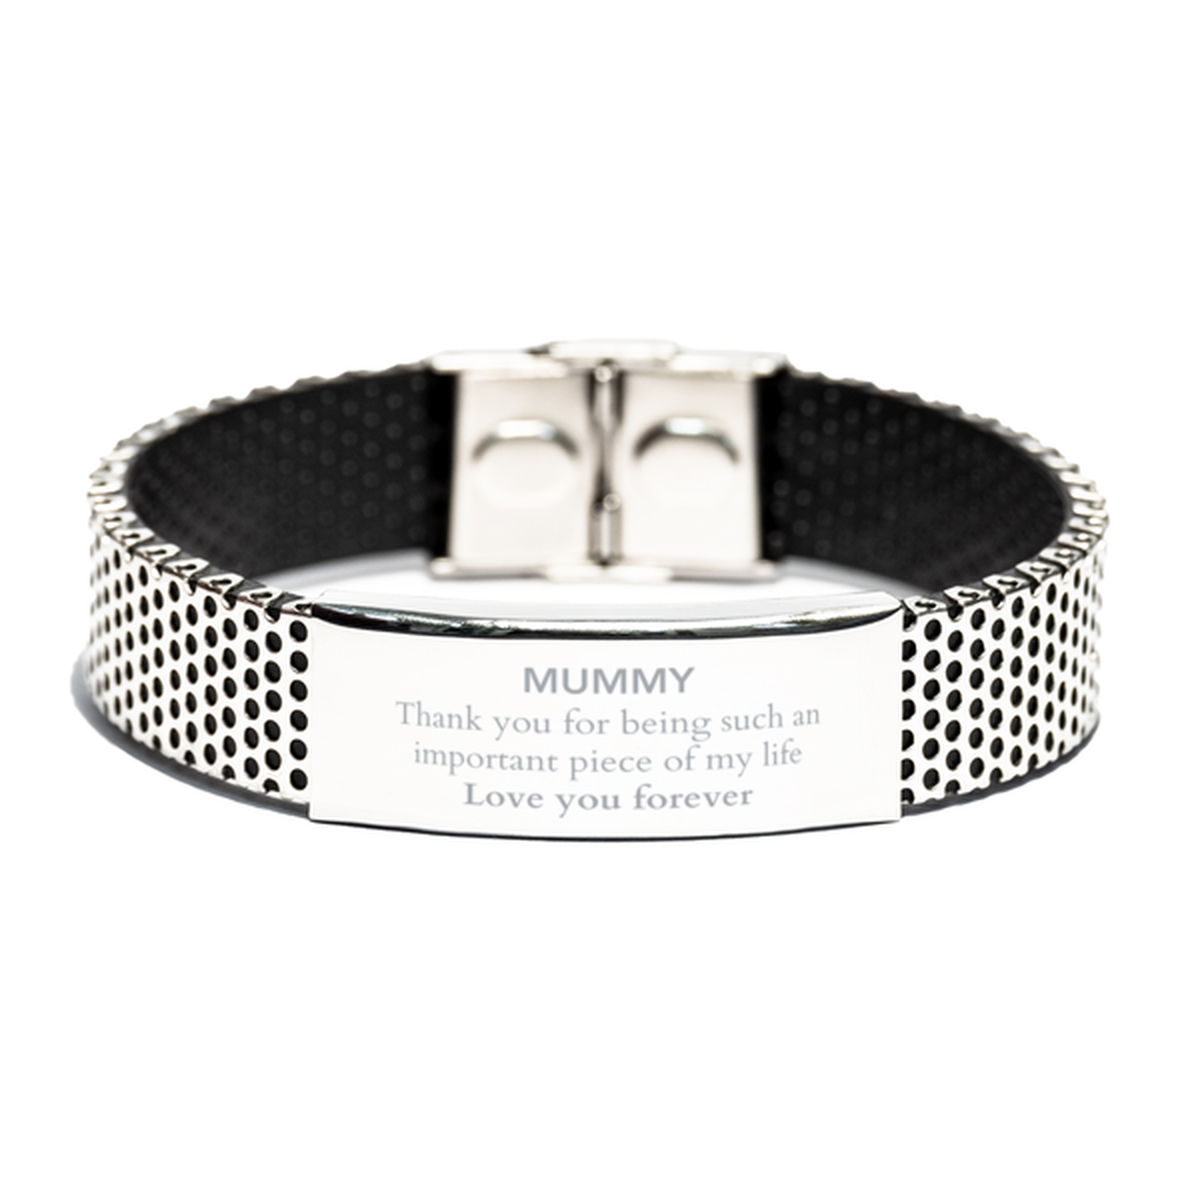 Appropriate Mummy Stainless Steel Bracelet Epic Birthday Gifts for Mummy Thank you for being such an important piece of my life Mummy Christmas Mothers Fathers Day